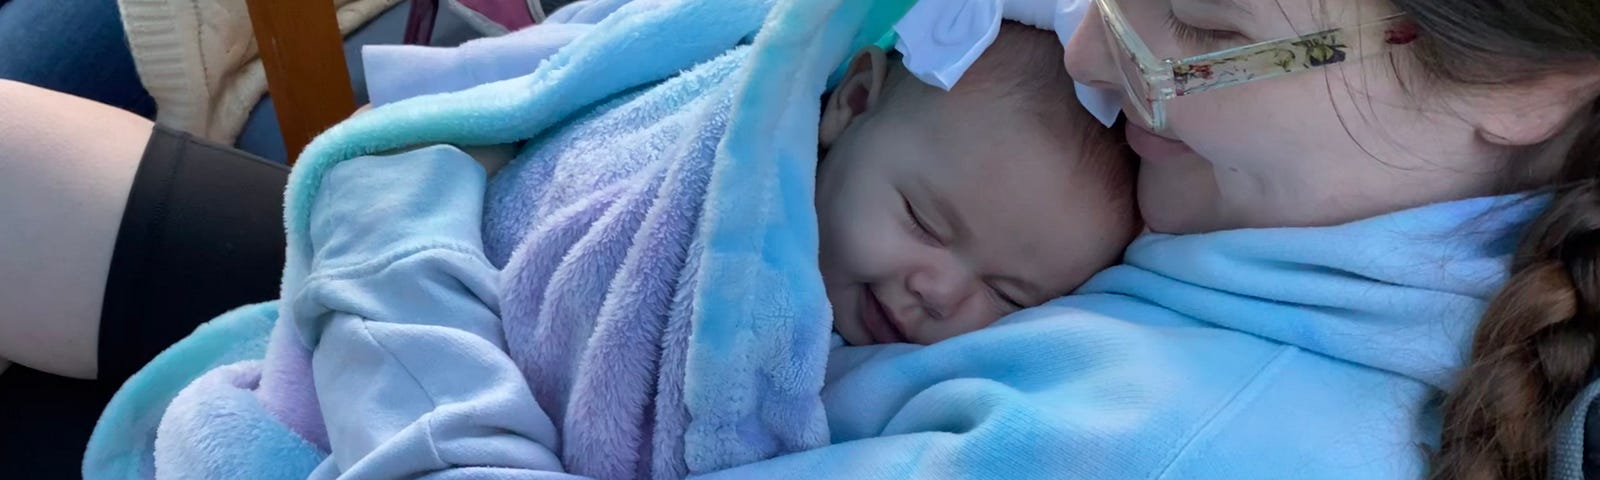 A mother smiling looking down at a smiling sleeping babe wrapped in a blanket.